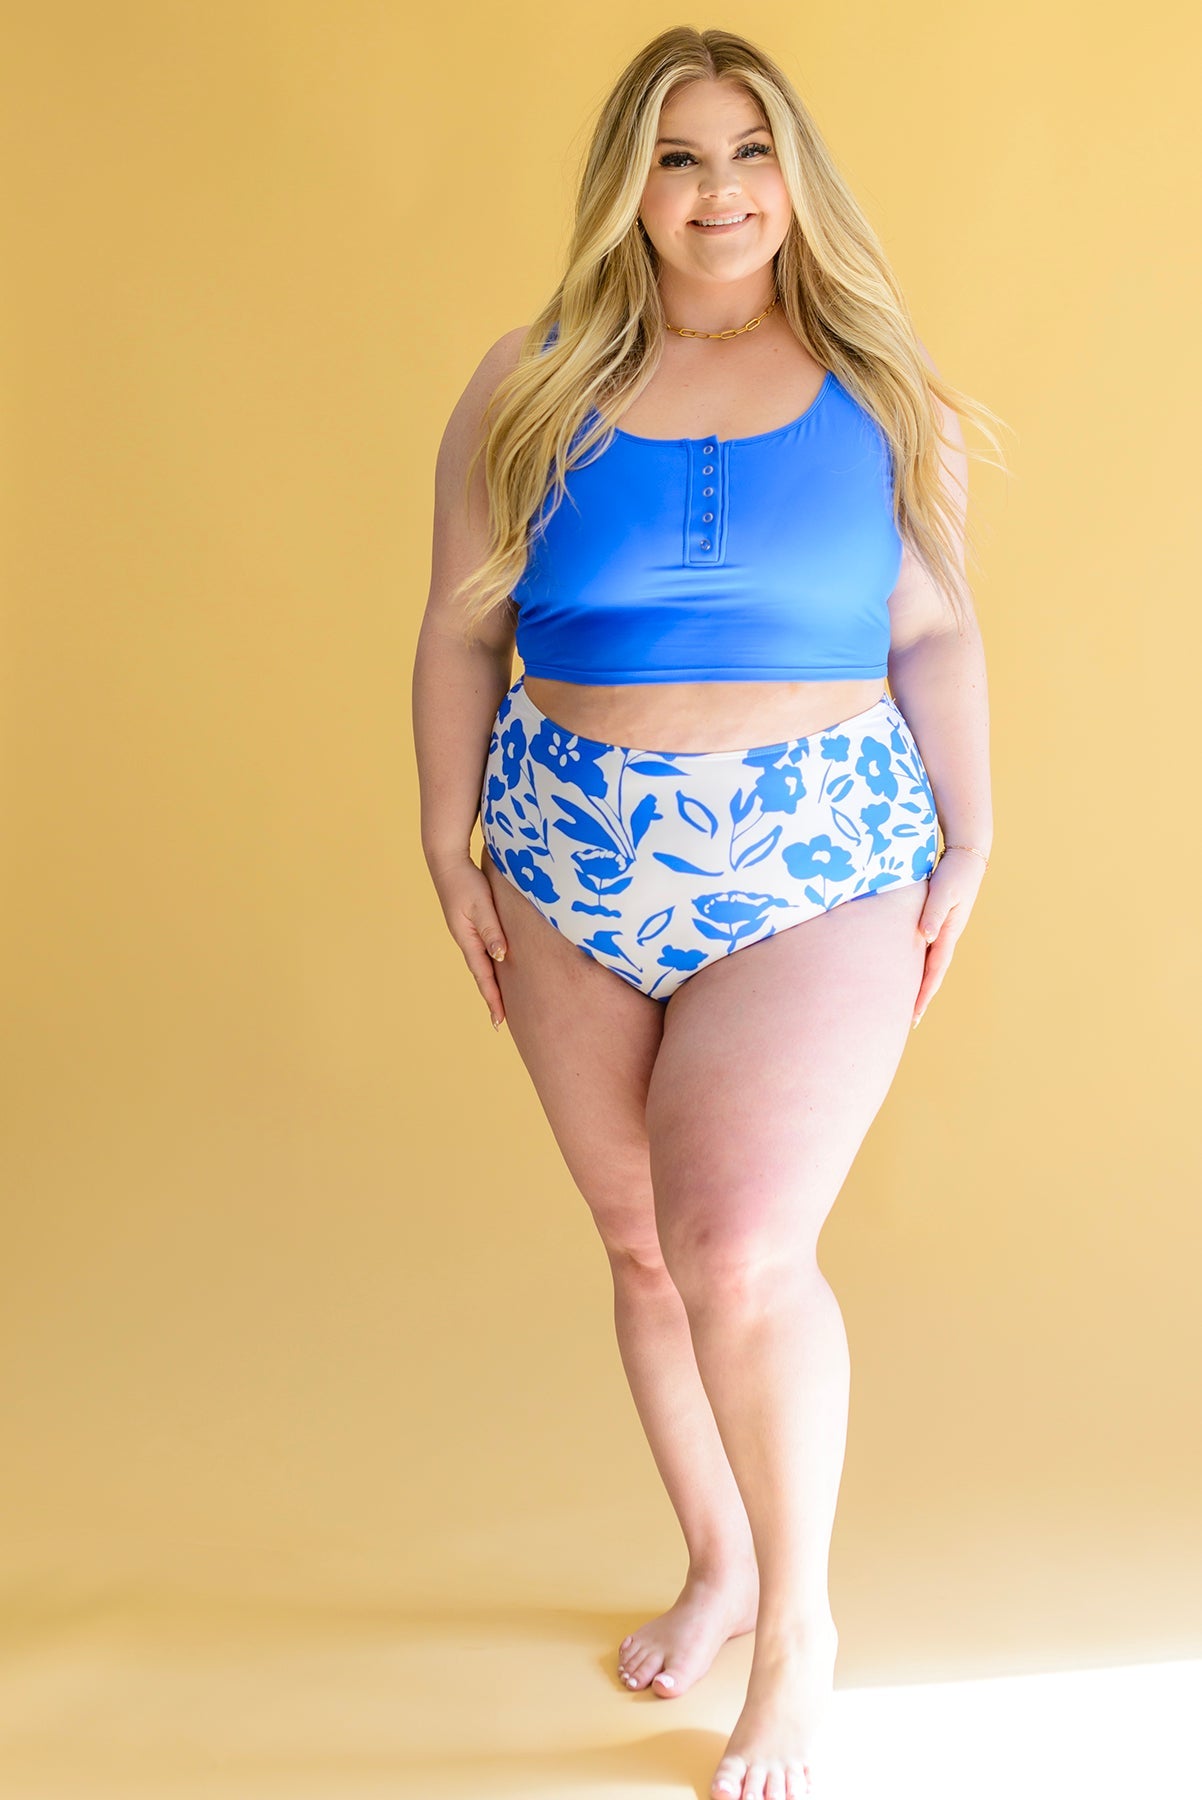 Bermuda Button Up Swim Top and Floral Swim Bottoms Womens Southern Soul Collectives 